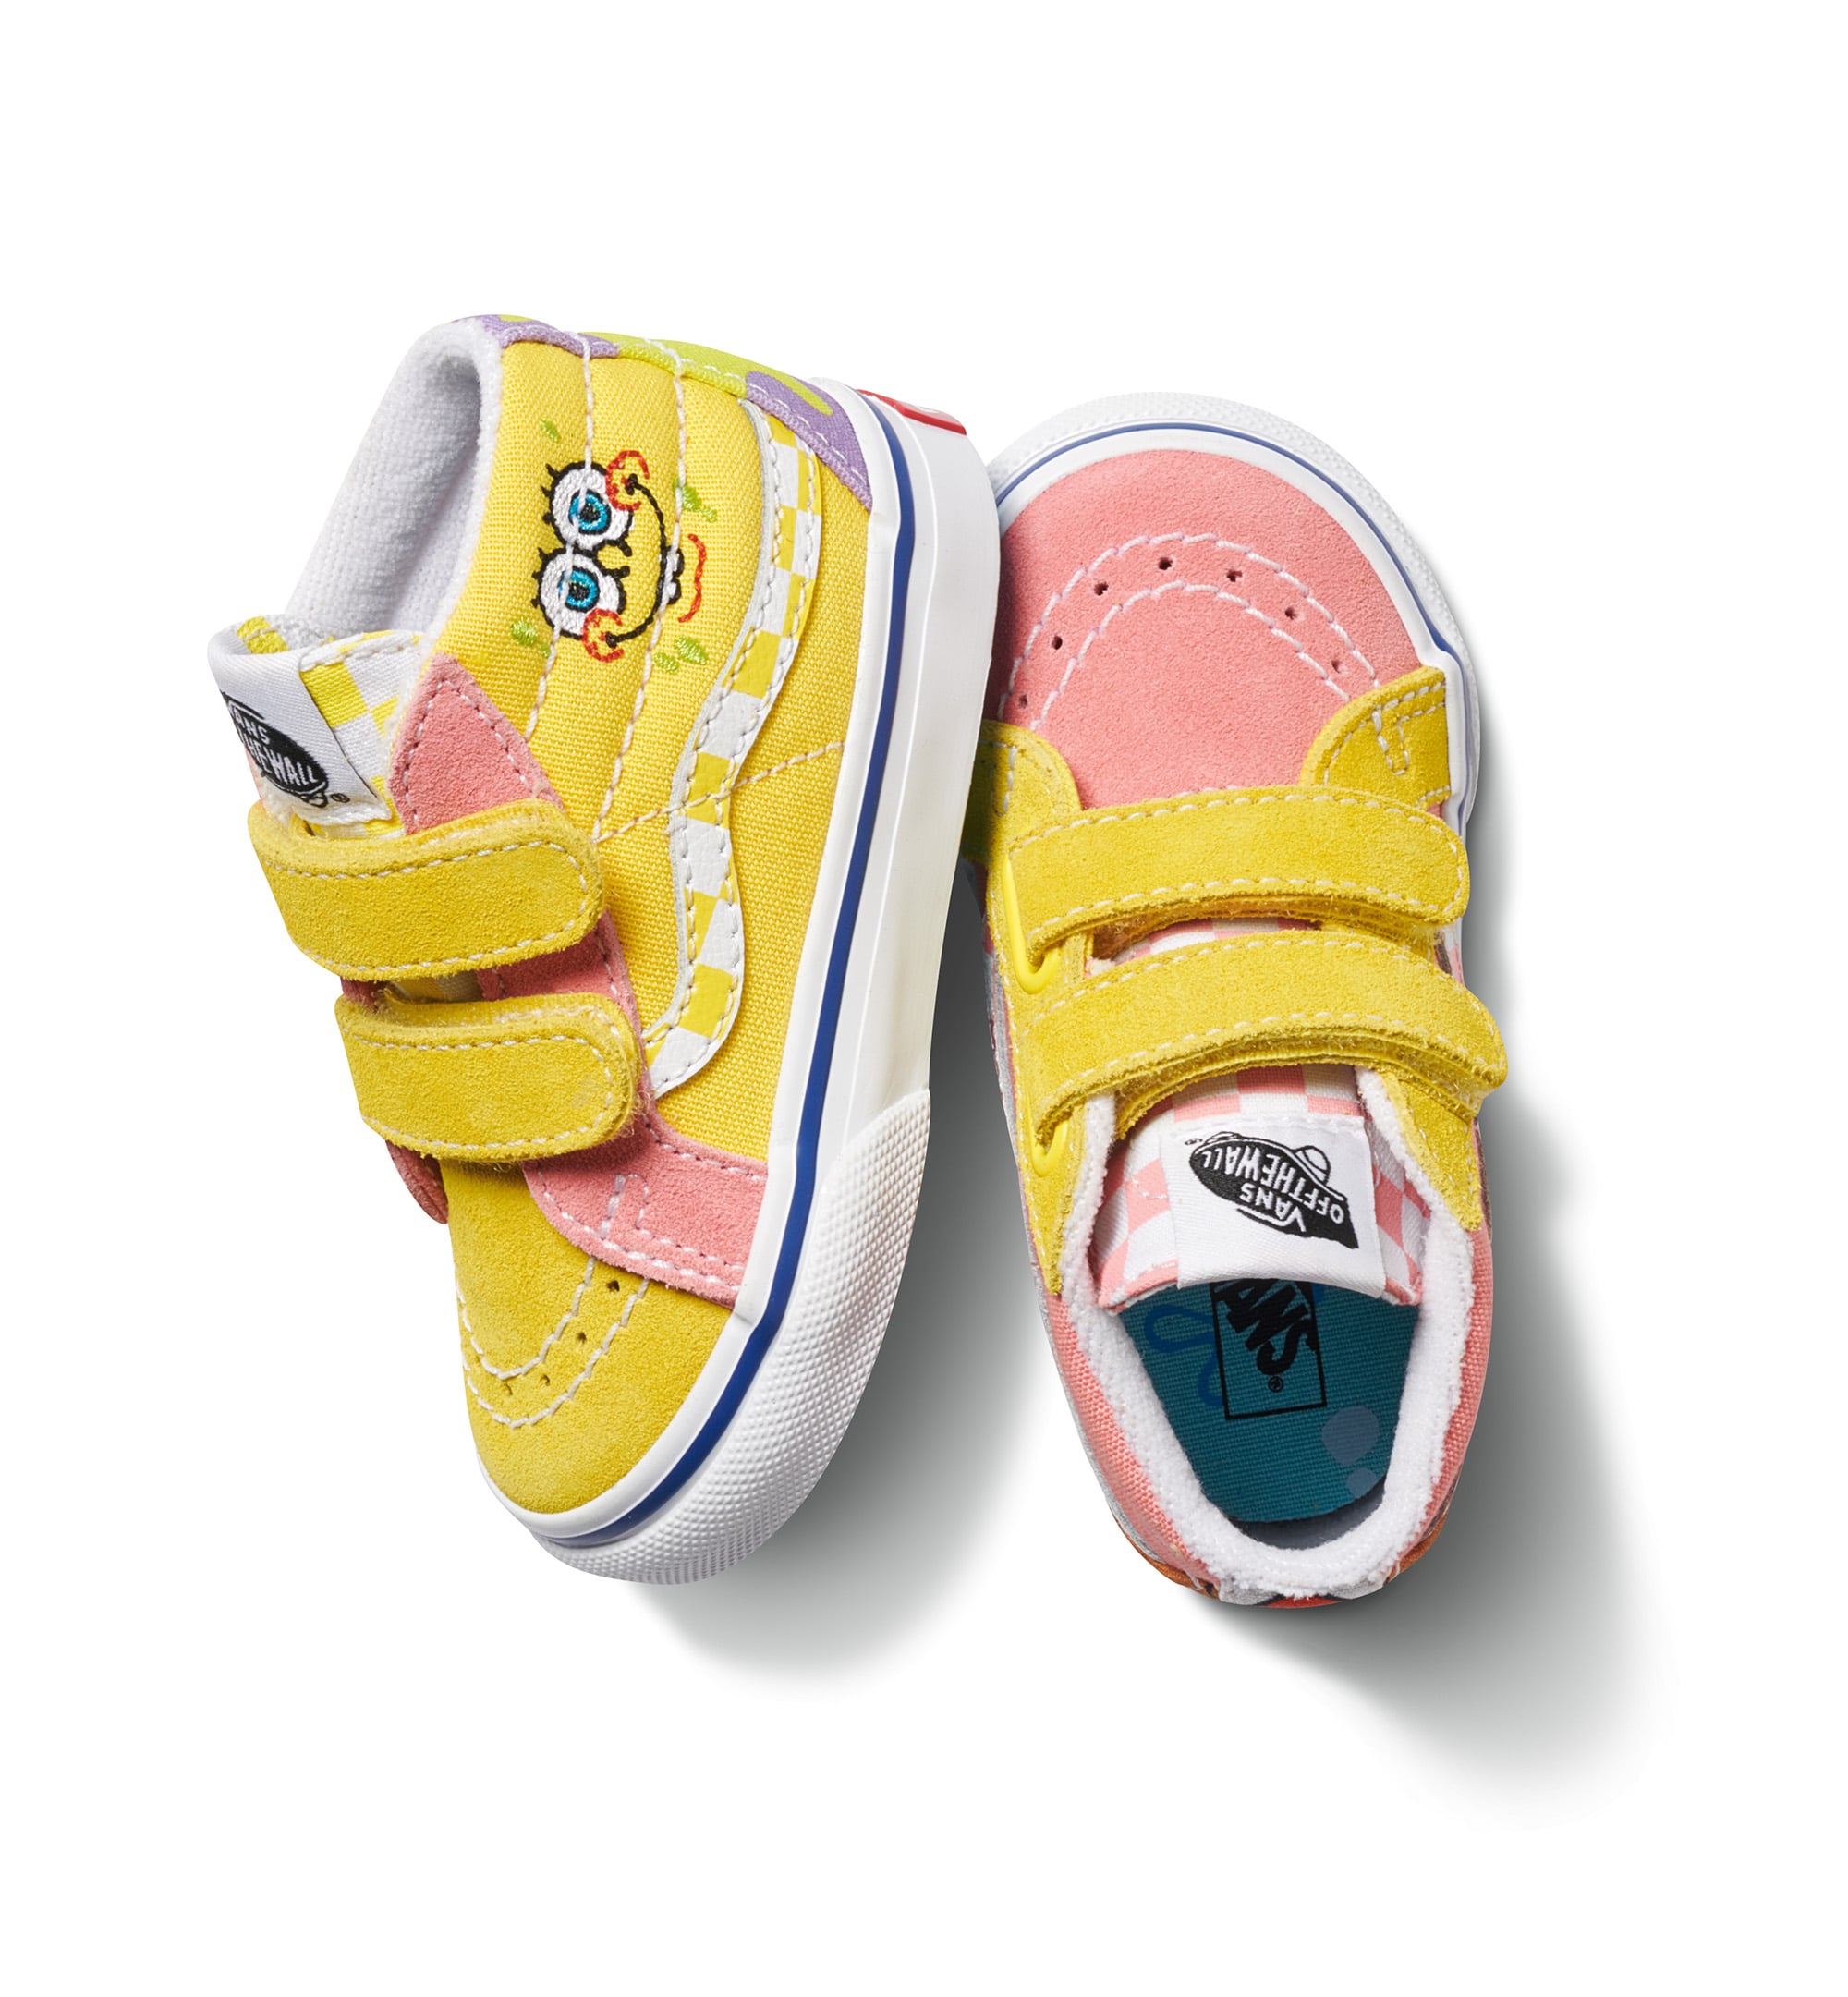 Stratford on Avon Neglect material SpongeBob Vans Collection For Toddlers and Kids | POPSUGAR Family